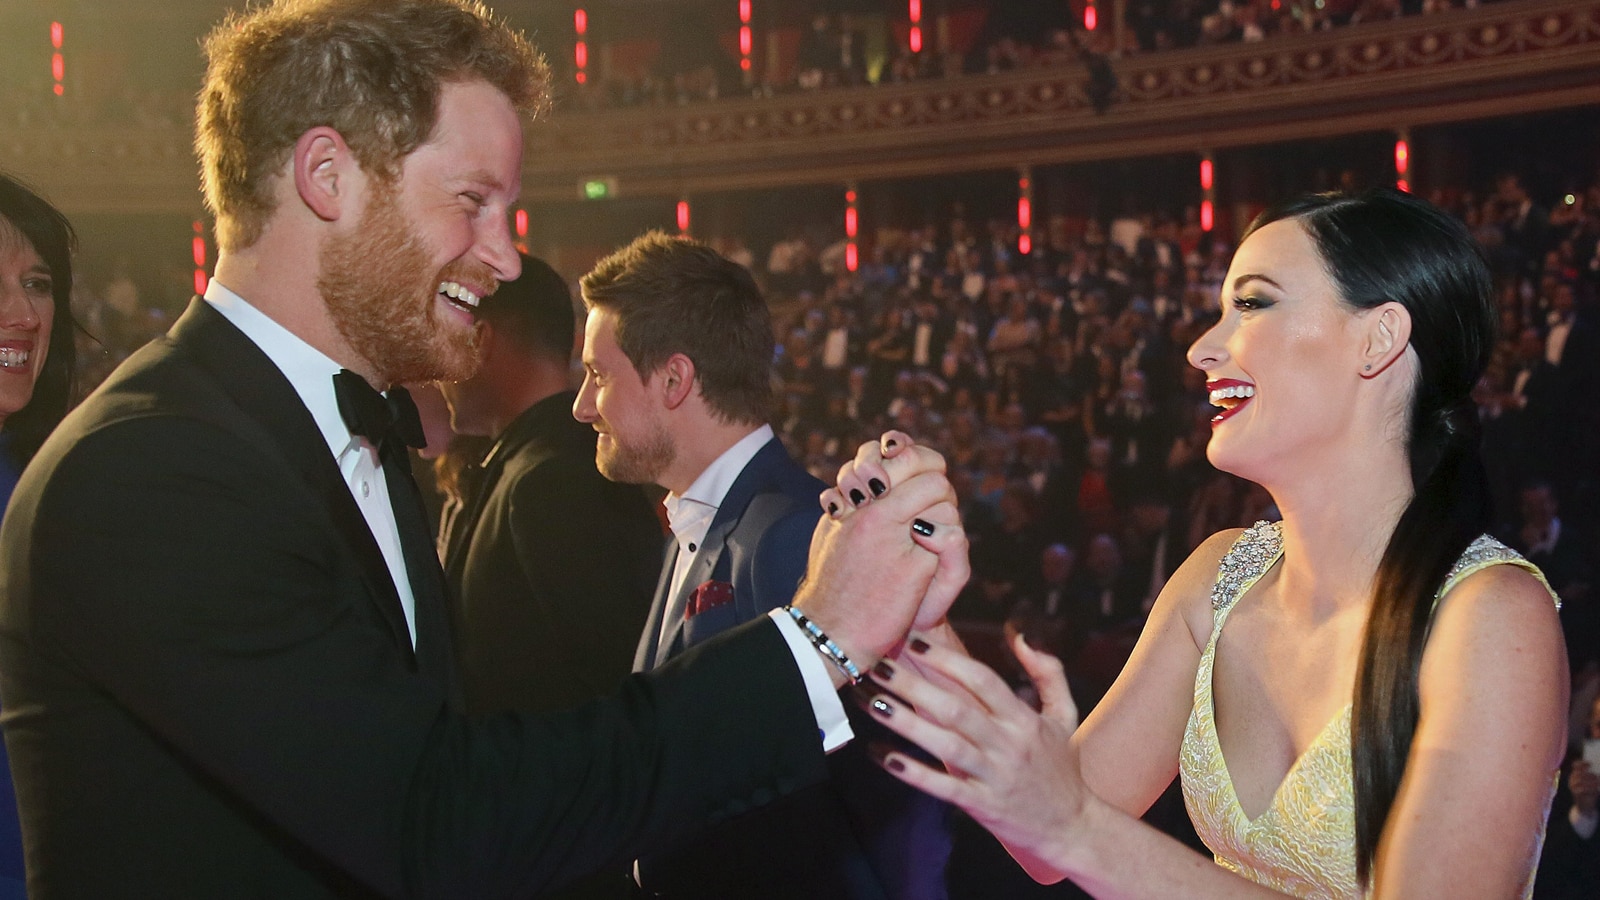 180309_3681389_Kacey_Musgraves_High_fived_Prince_Harry___Br image